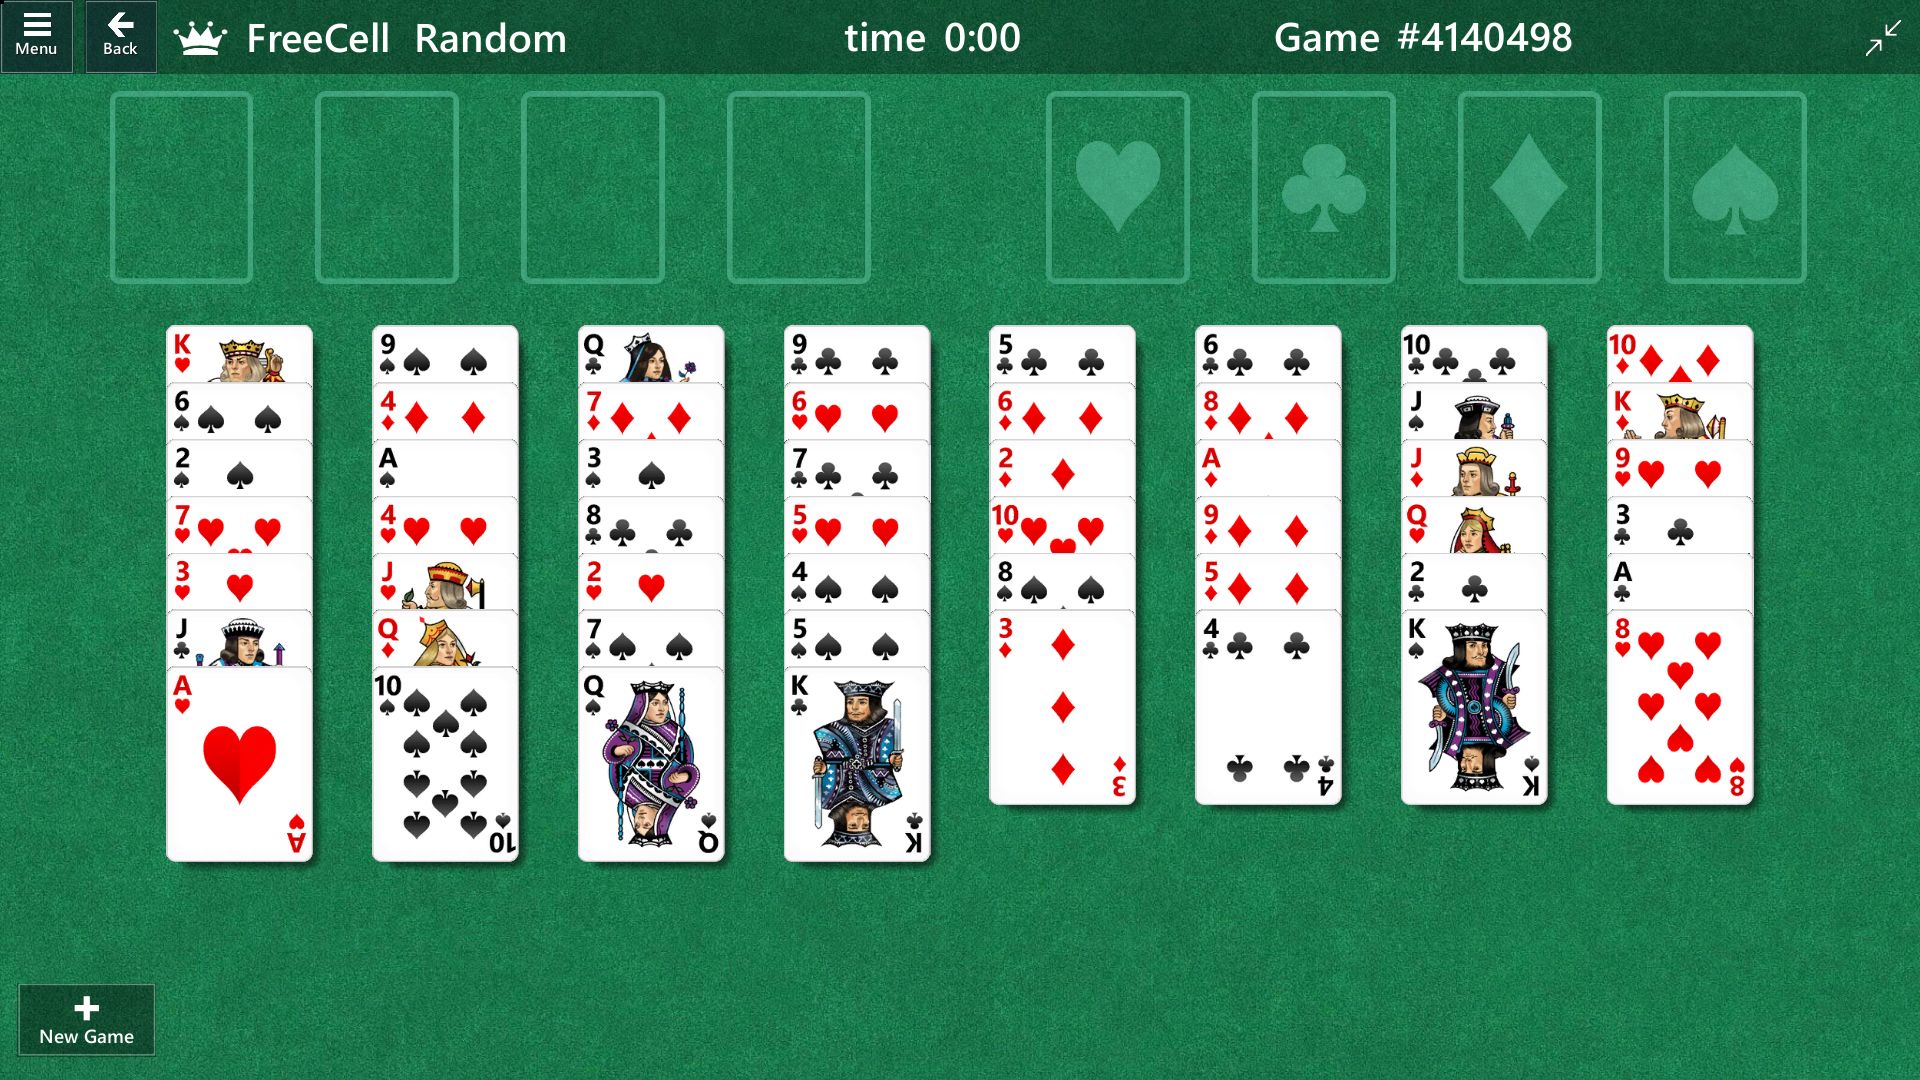 Microsoft Solitaire Online GamePlay 